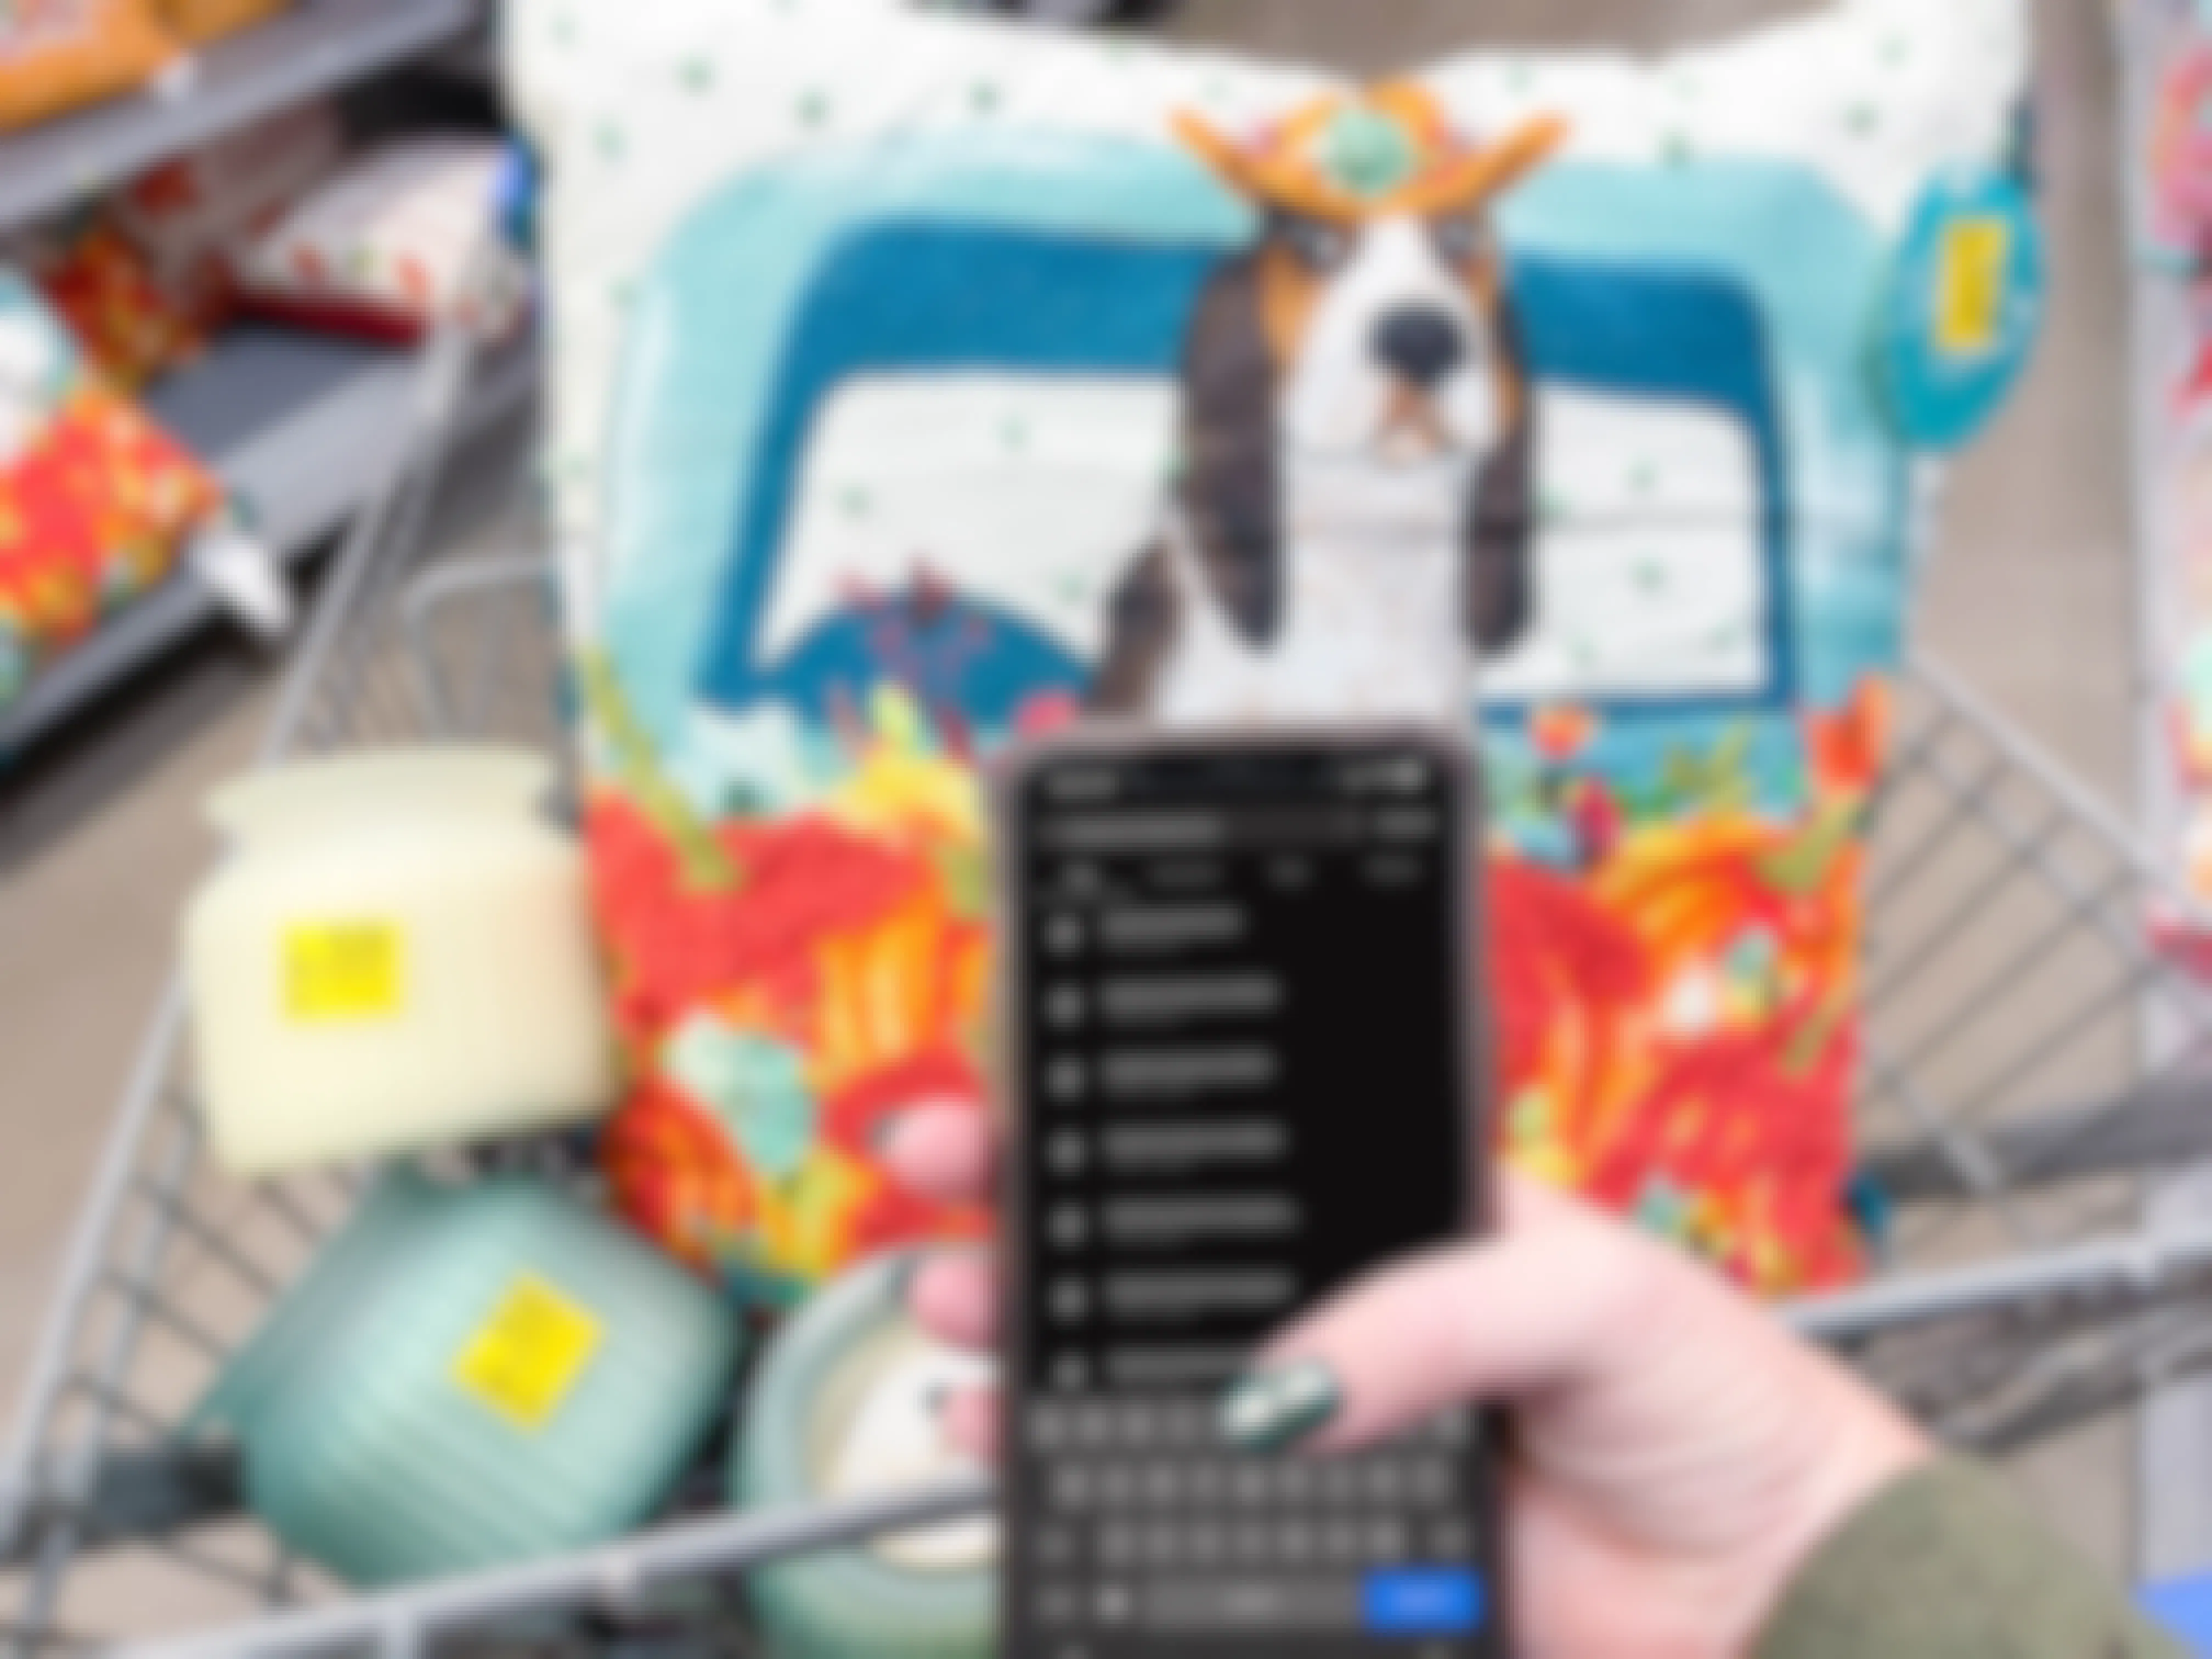 person with walmart items in cart searching for instagram hashtags on phone